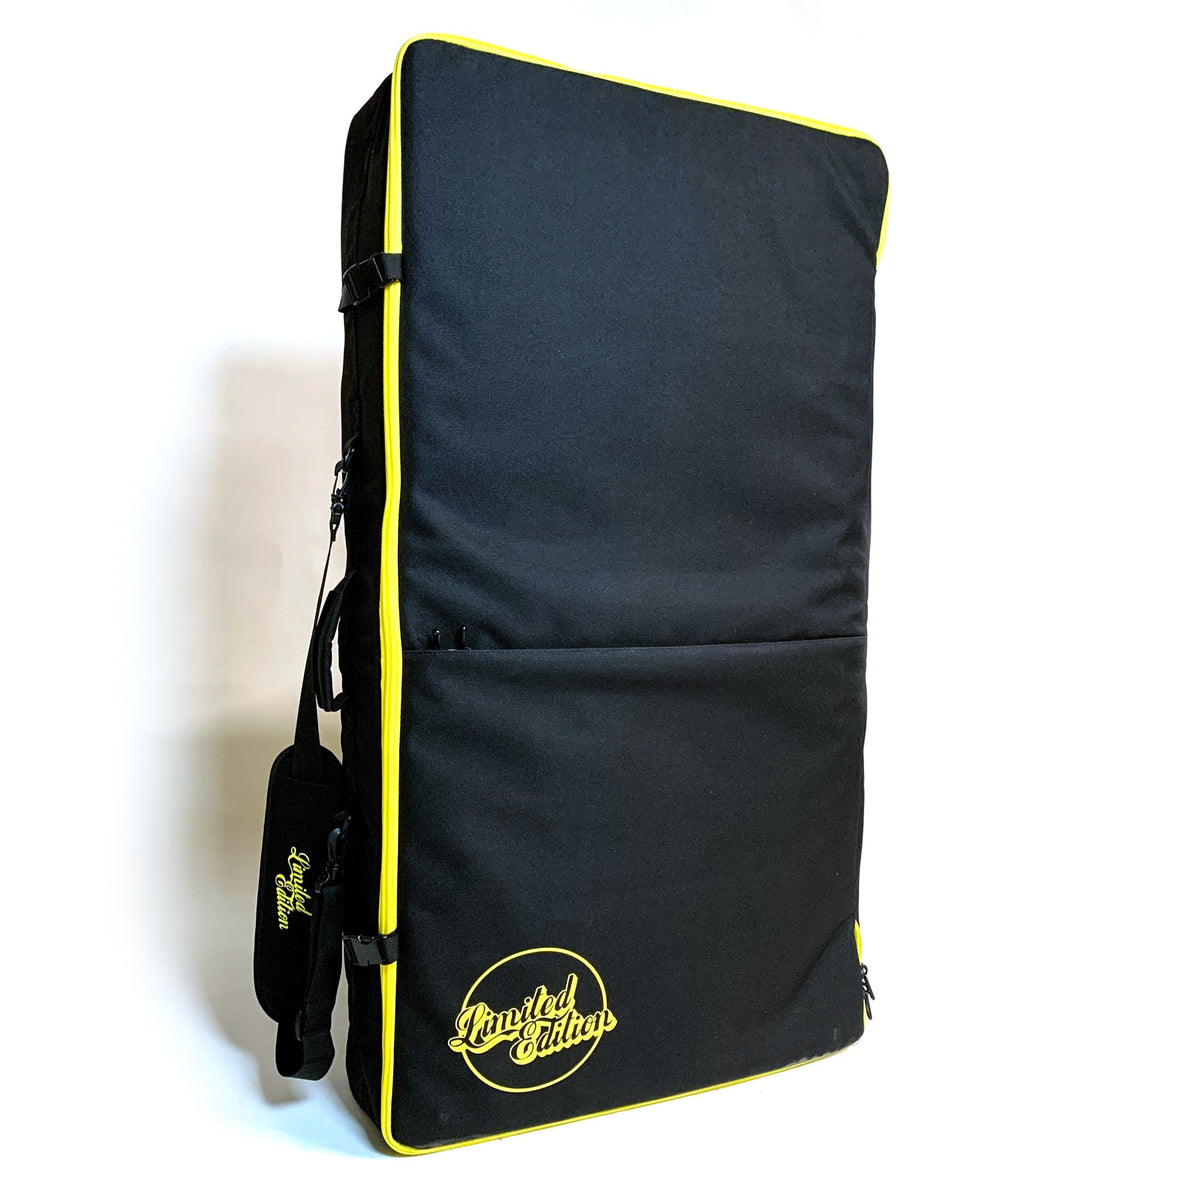 Limited Edition Global Bodyboard Cover - Nomad Bodyboards